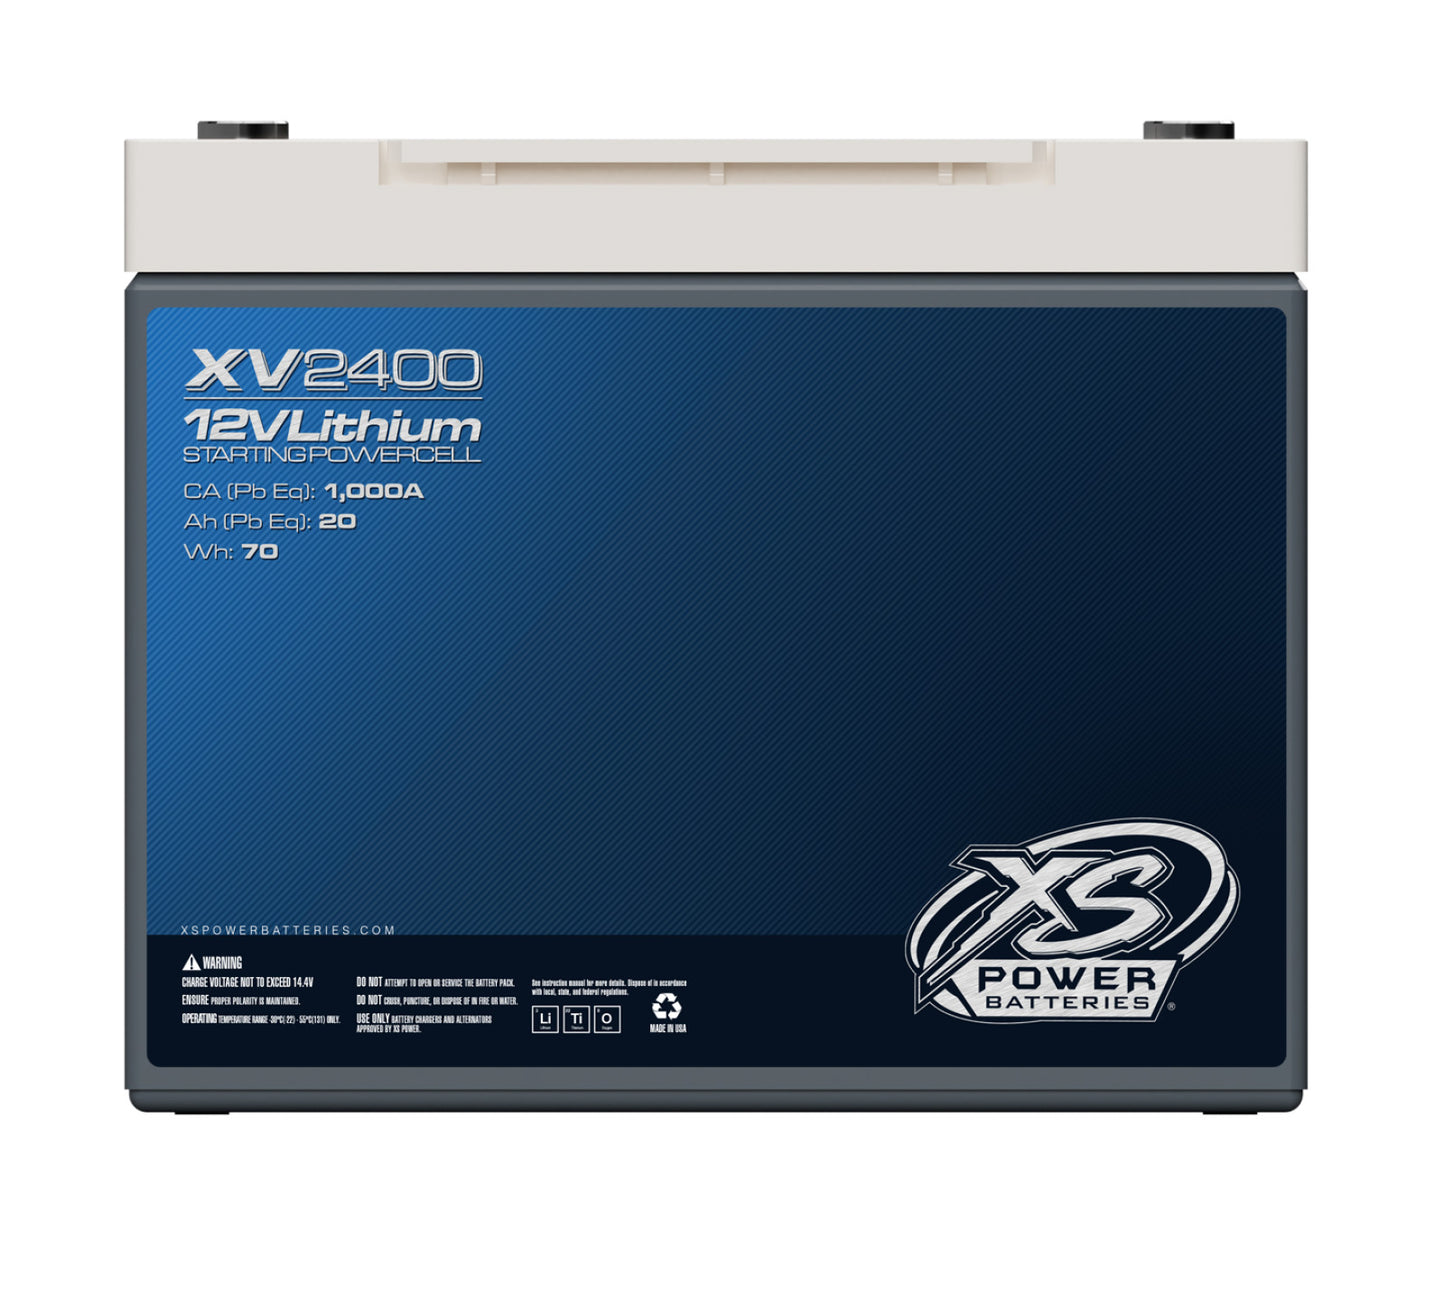 XS Power Batteries 12V Lithium Titanate XV Series Batteries - M6 Terminal Bolts Included 1335 Max Amps